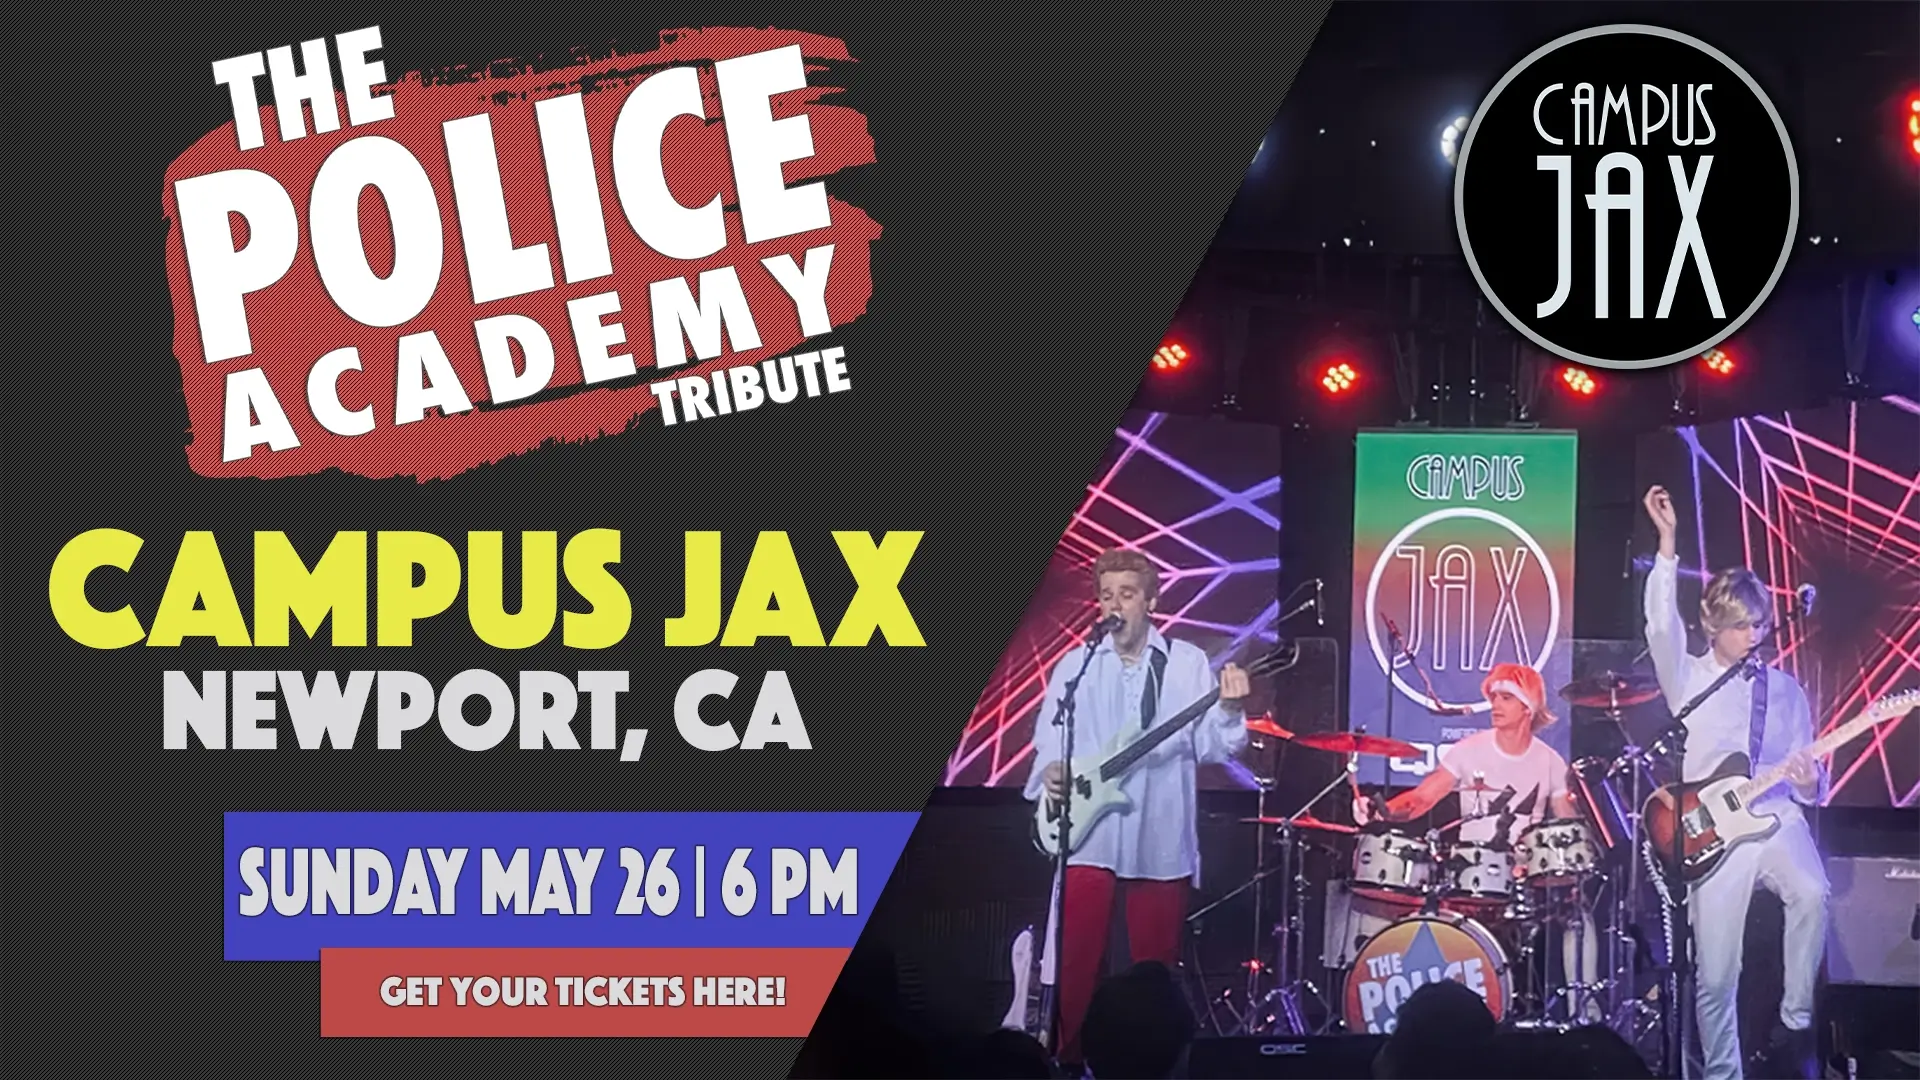 The Police Academy tribute band will perform live at Campus Jax on Sunday May 26 at 6 PM.